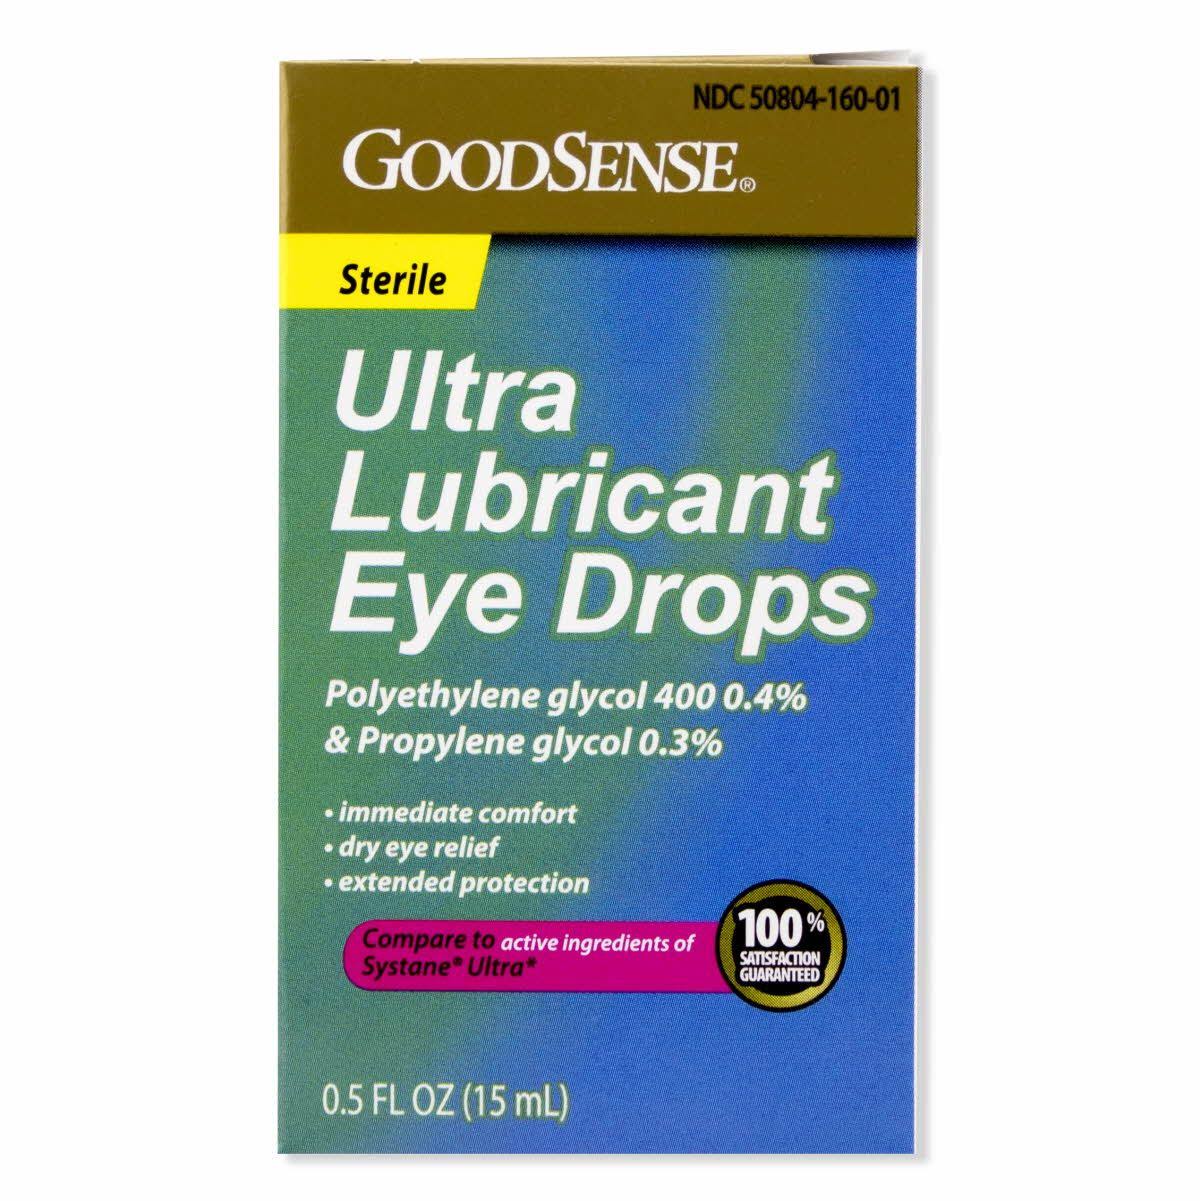 GoodSense Extended Protection Sterile Ultra Lubricant Eye Drops, 0.5 F